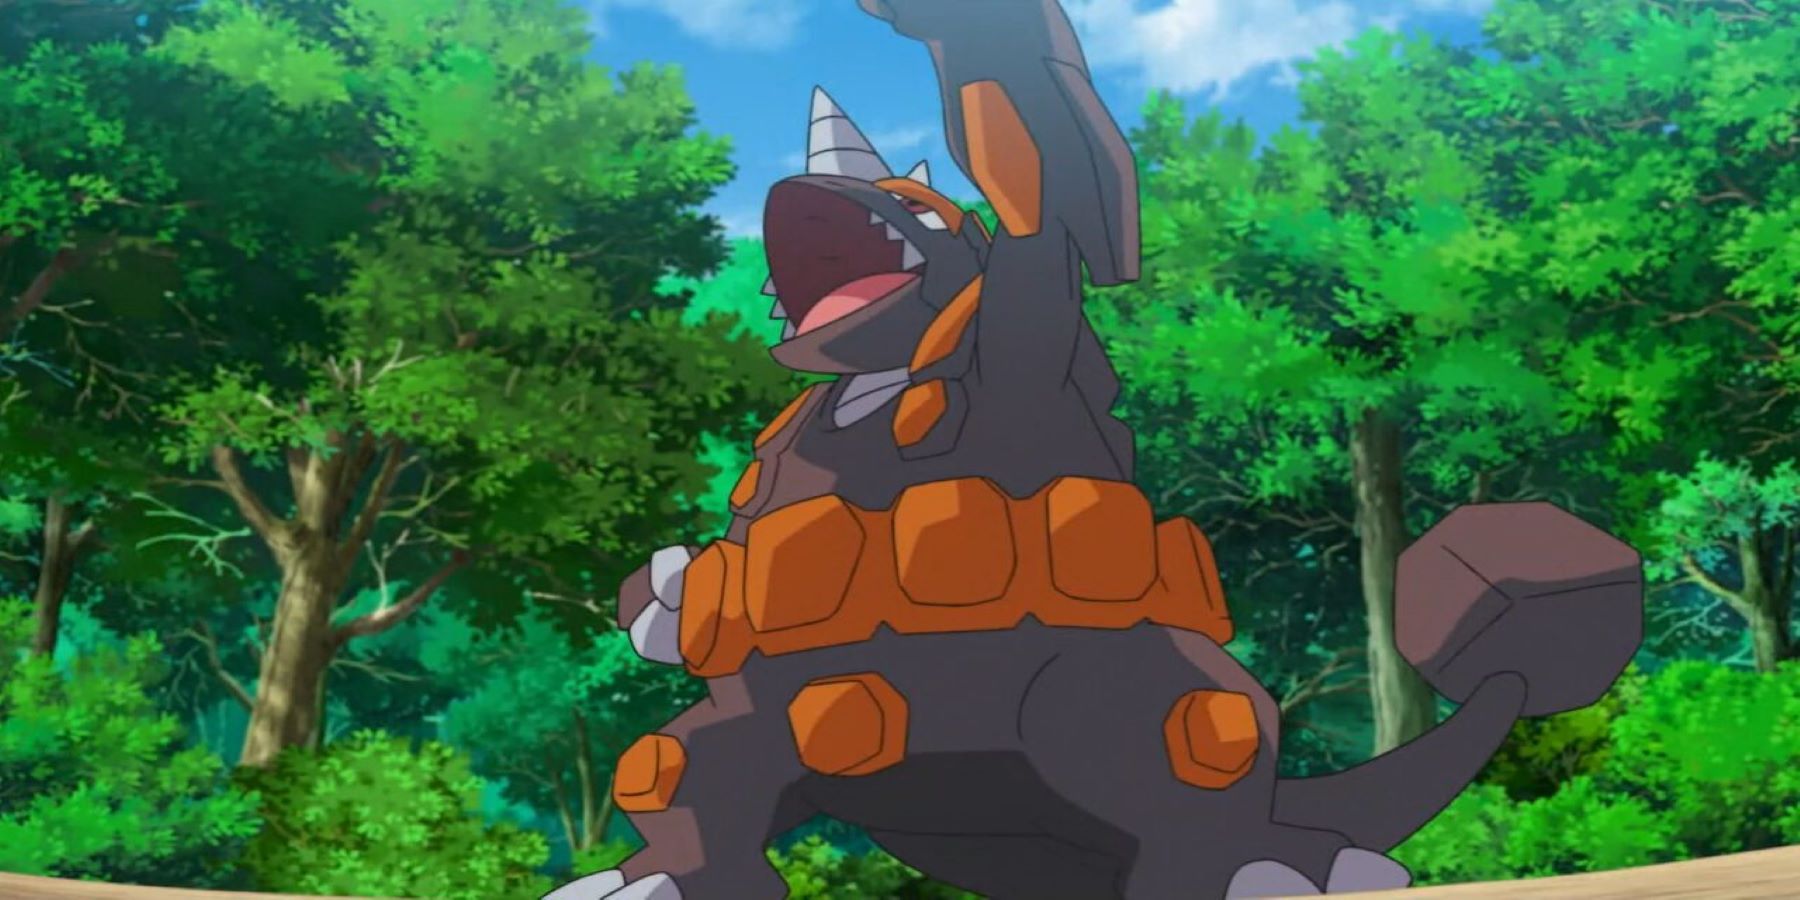 A Rhyperior standing in a forest and raising one arm triumphantly in the Pokemon anime